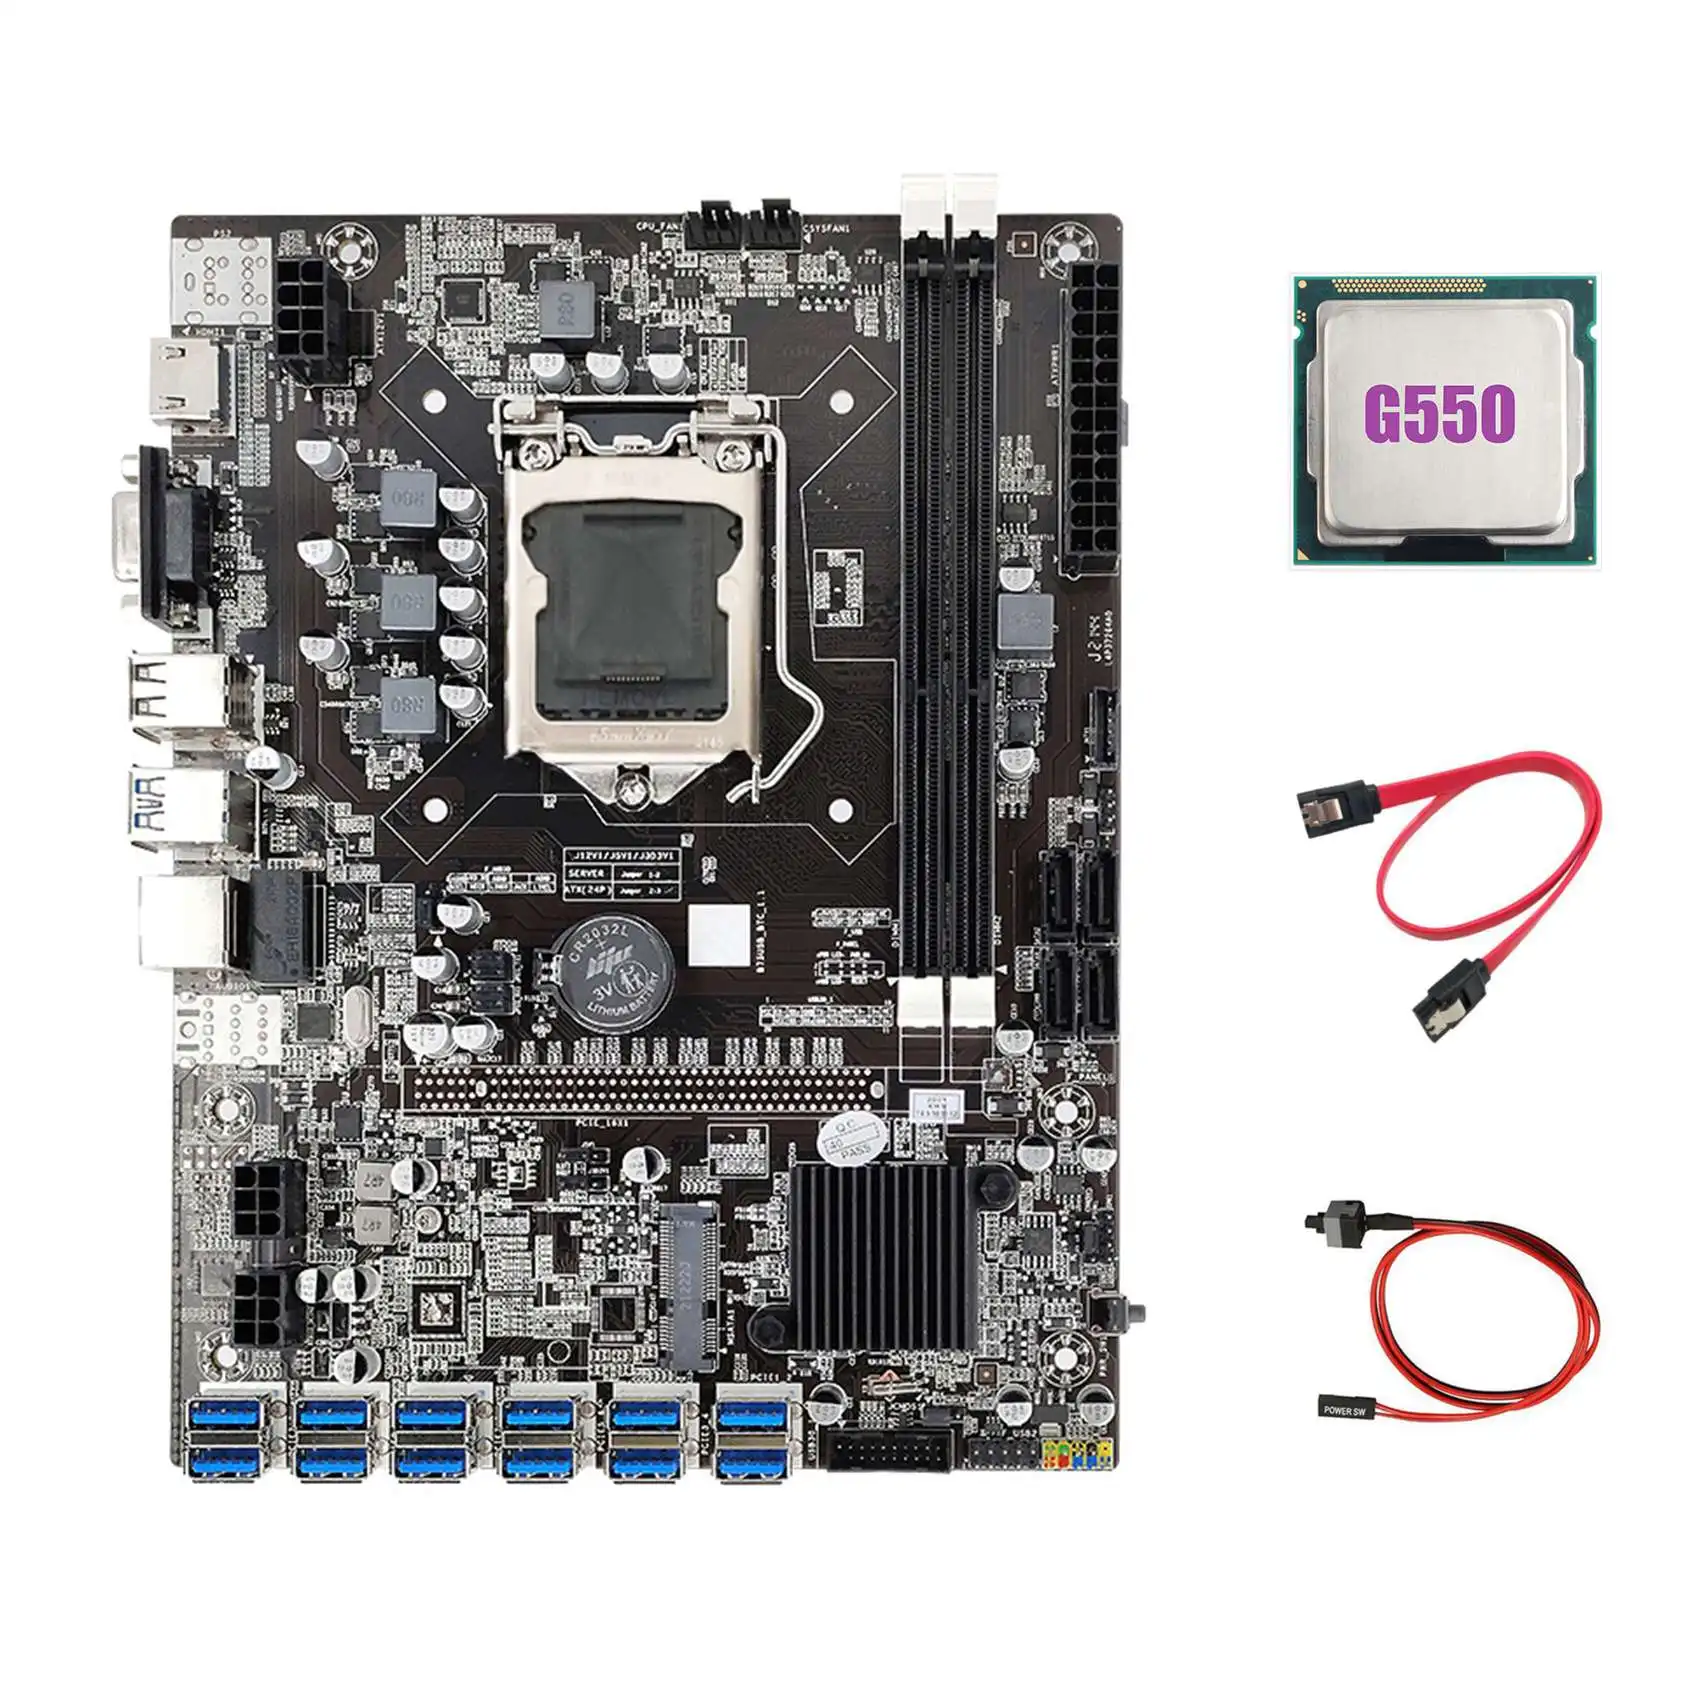 B75 ETH Mining Motherboard 12 PCIE to USB+G550 CPU+SATA Cable+Switch Cable LGA1155 DDR3 MSATA B75 USB Miner Motherboard